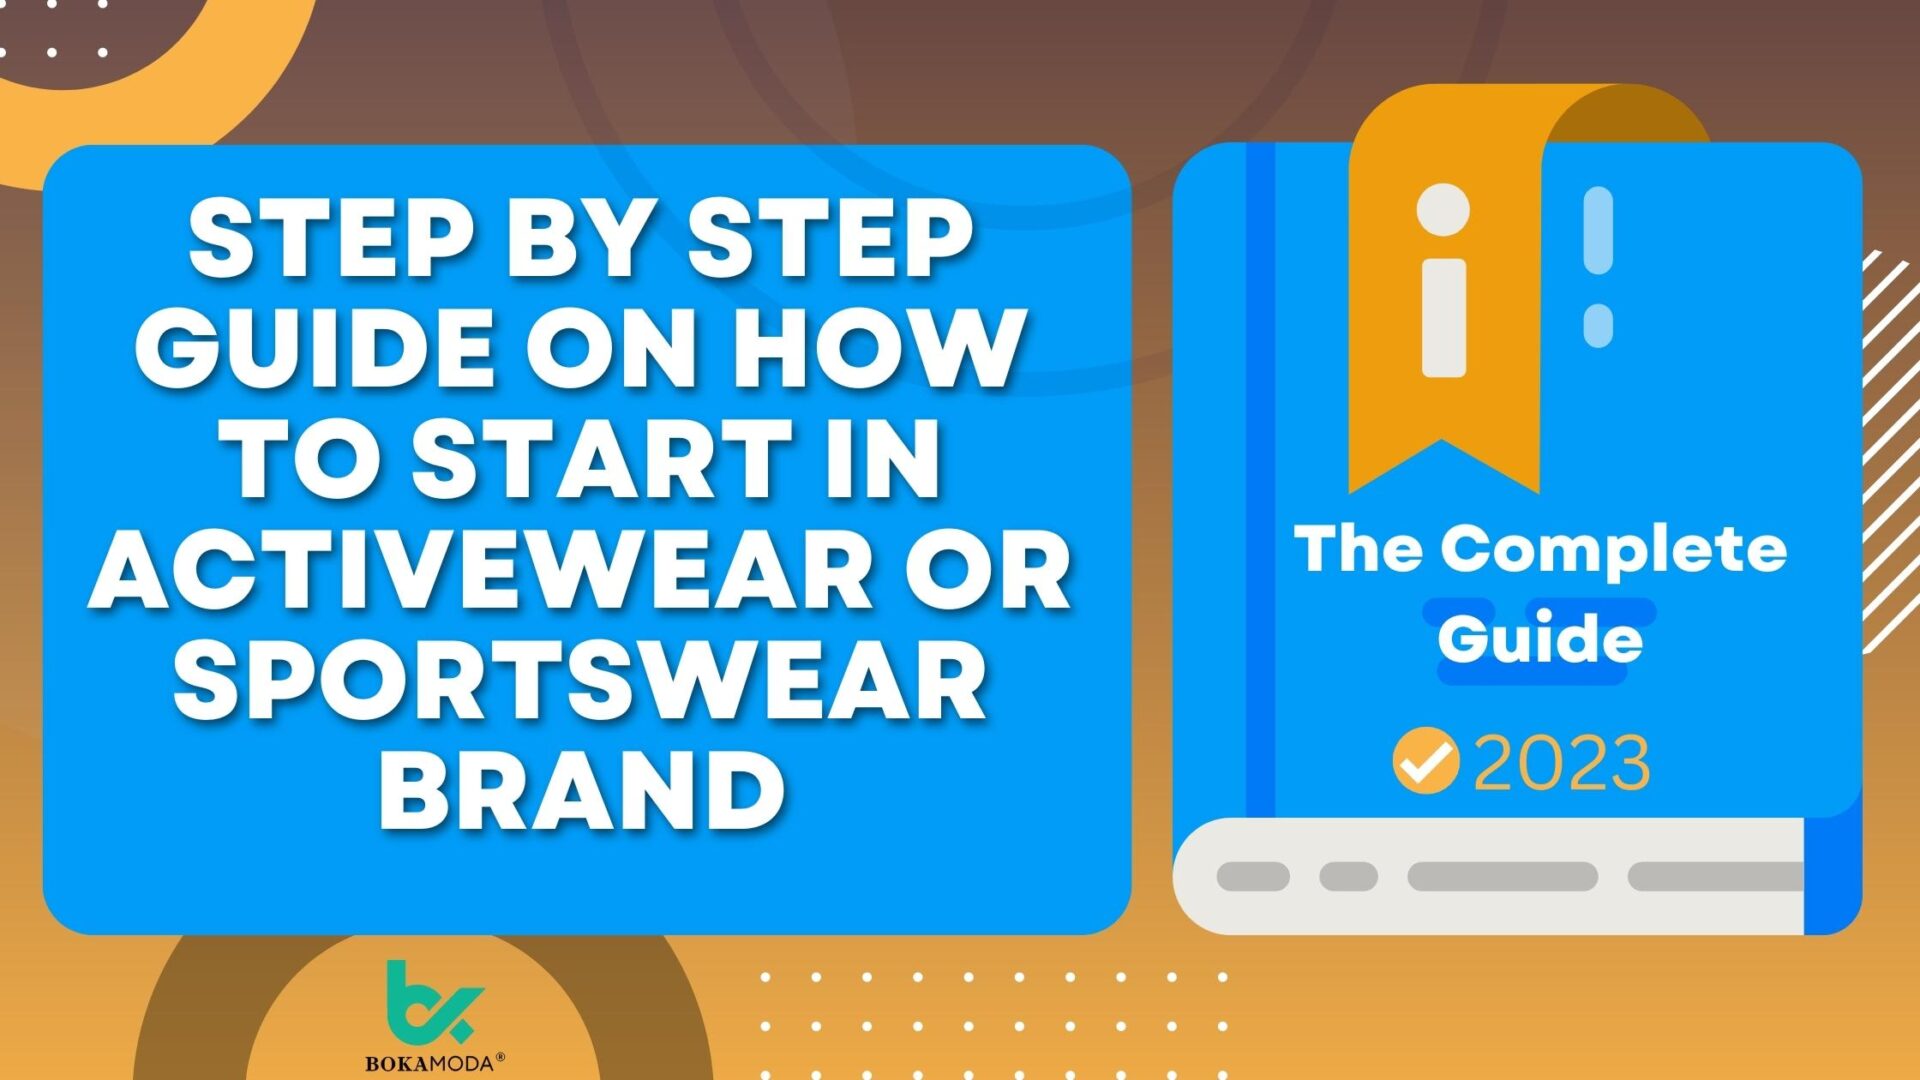 Step by Step Guide on How to Start in Activewear or Sportswear Brand